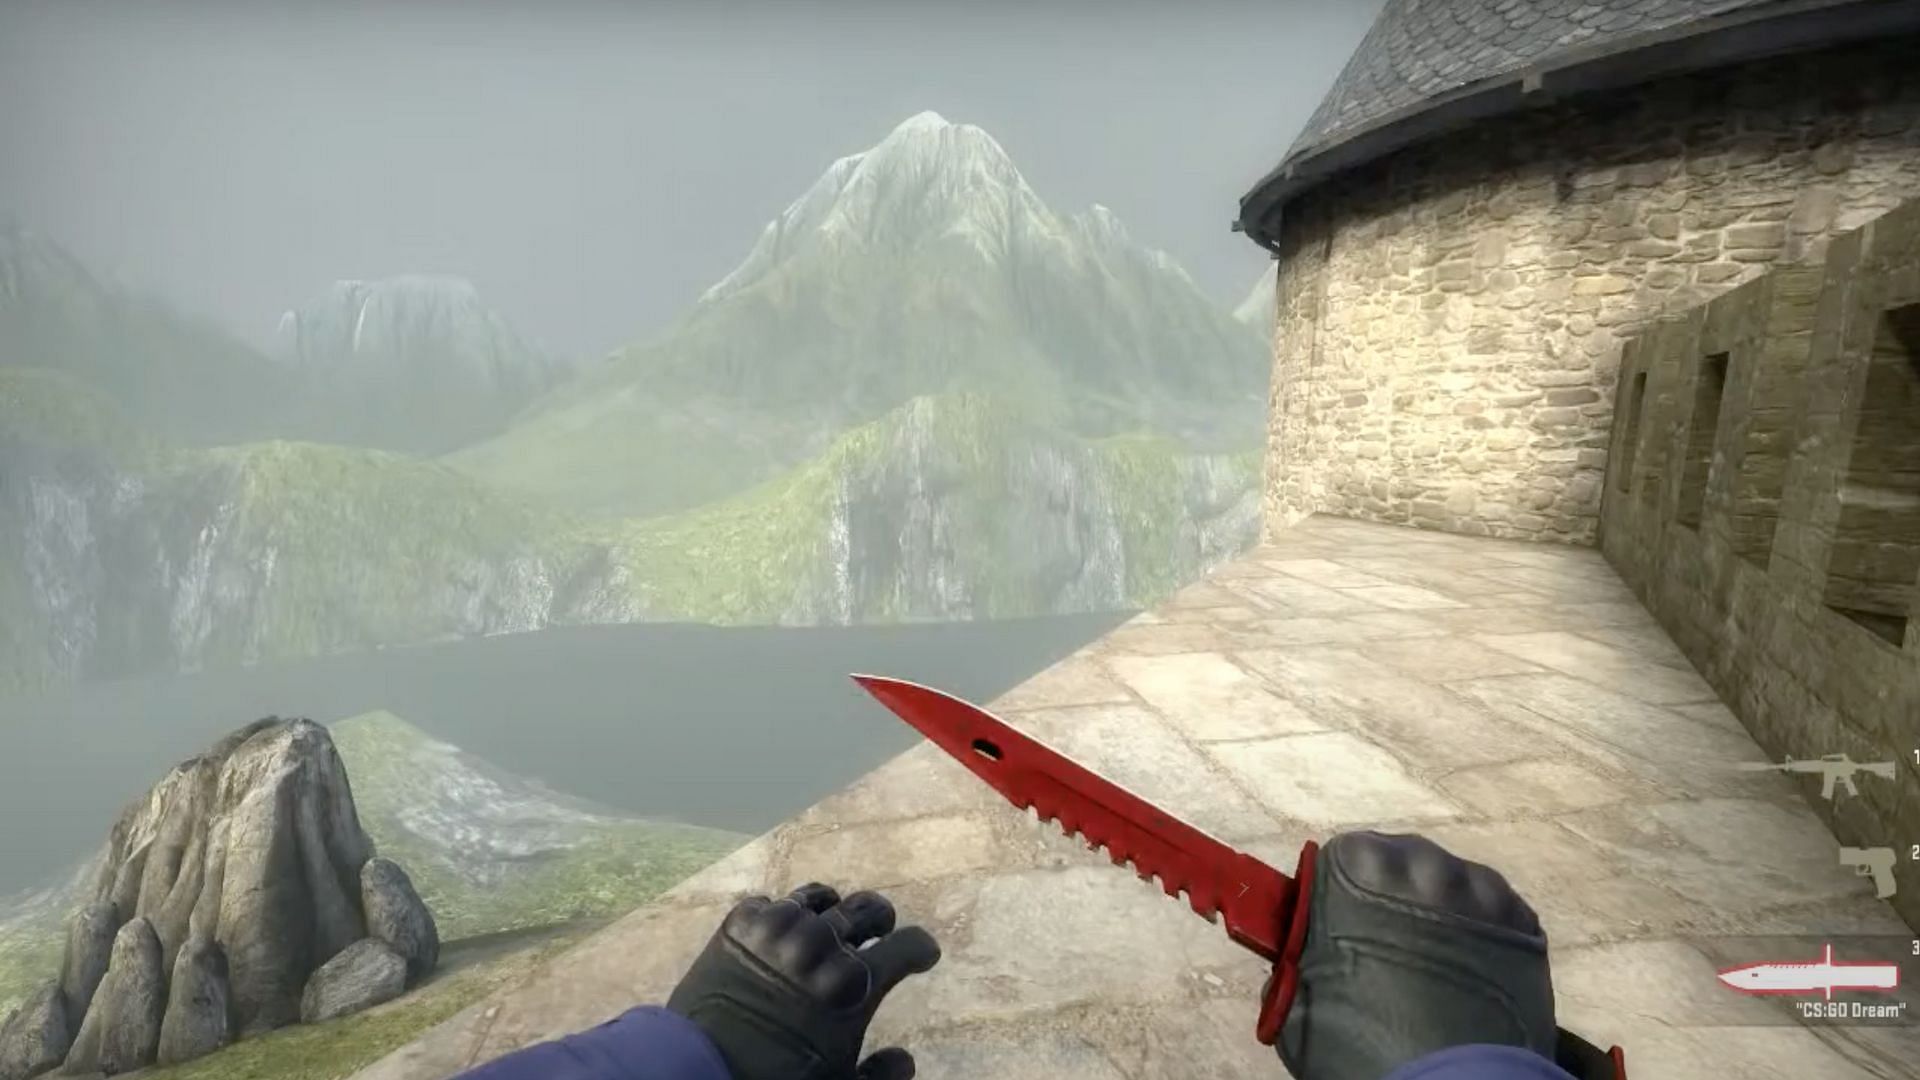 CS:GO players can sell their rare skins for a lot of money (Image via CSGO Dream/YouTube)